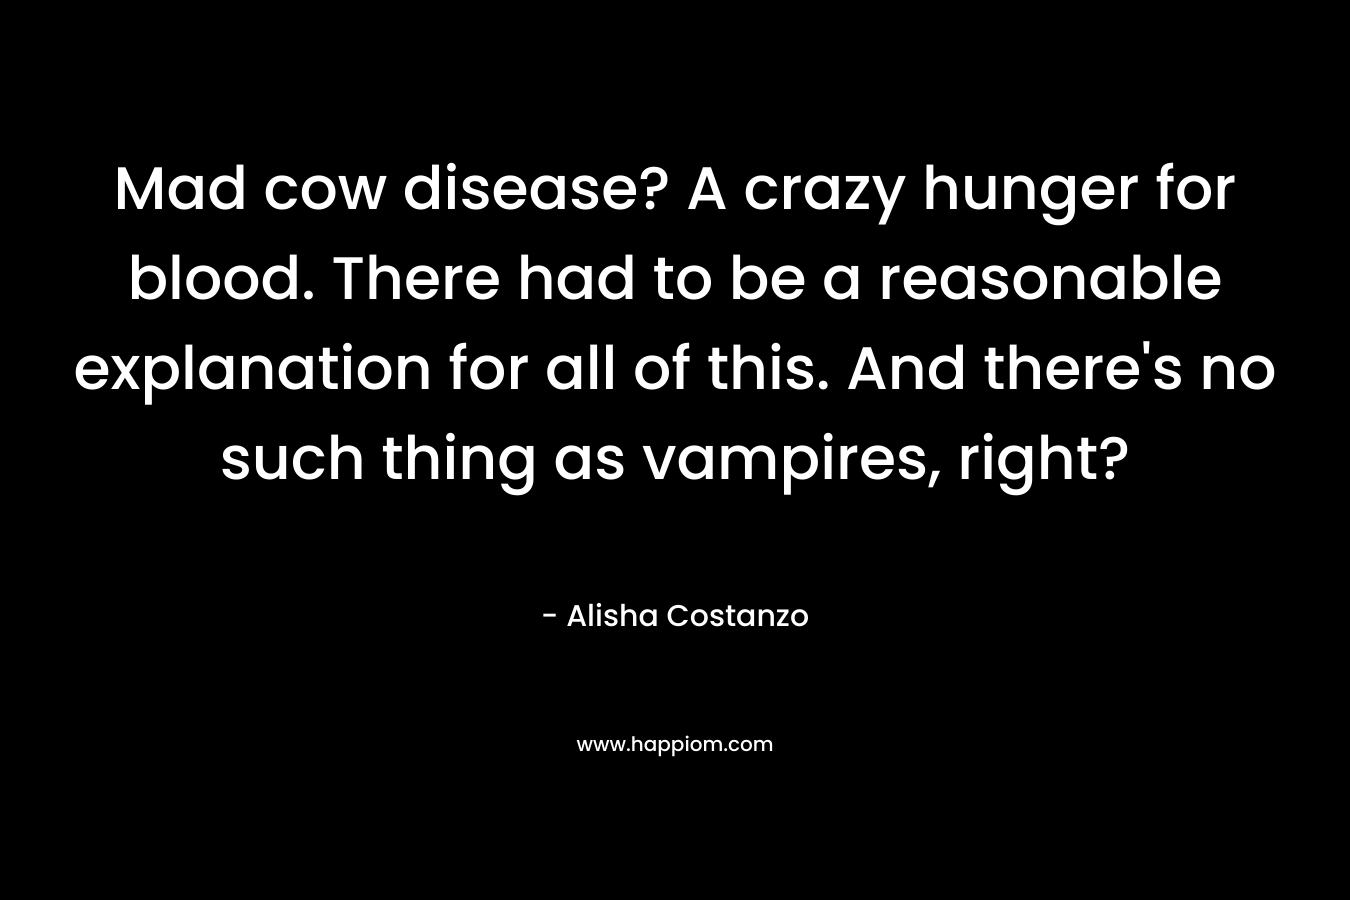 Mad cow disease? A crazy hunger for blood. There had to be a reasonable explanation for all of this. And there's no such thing as vampires, right?